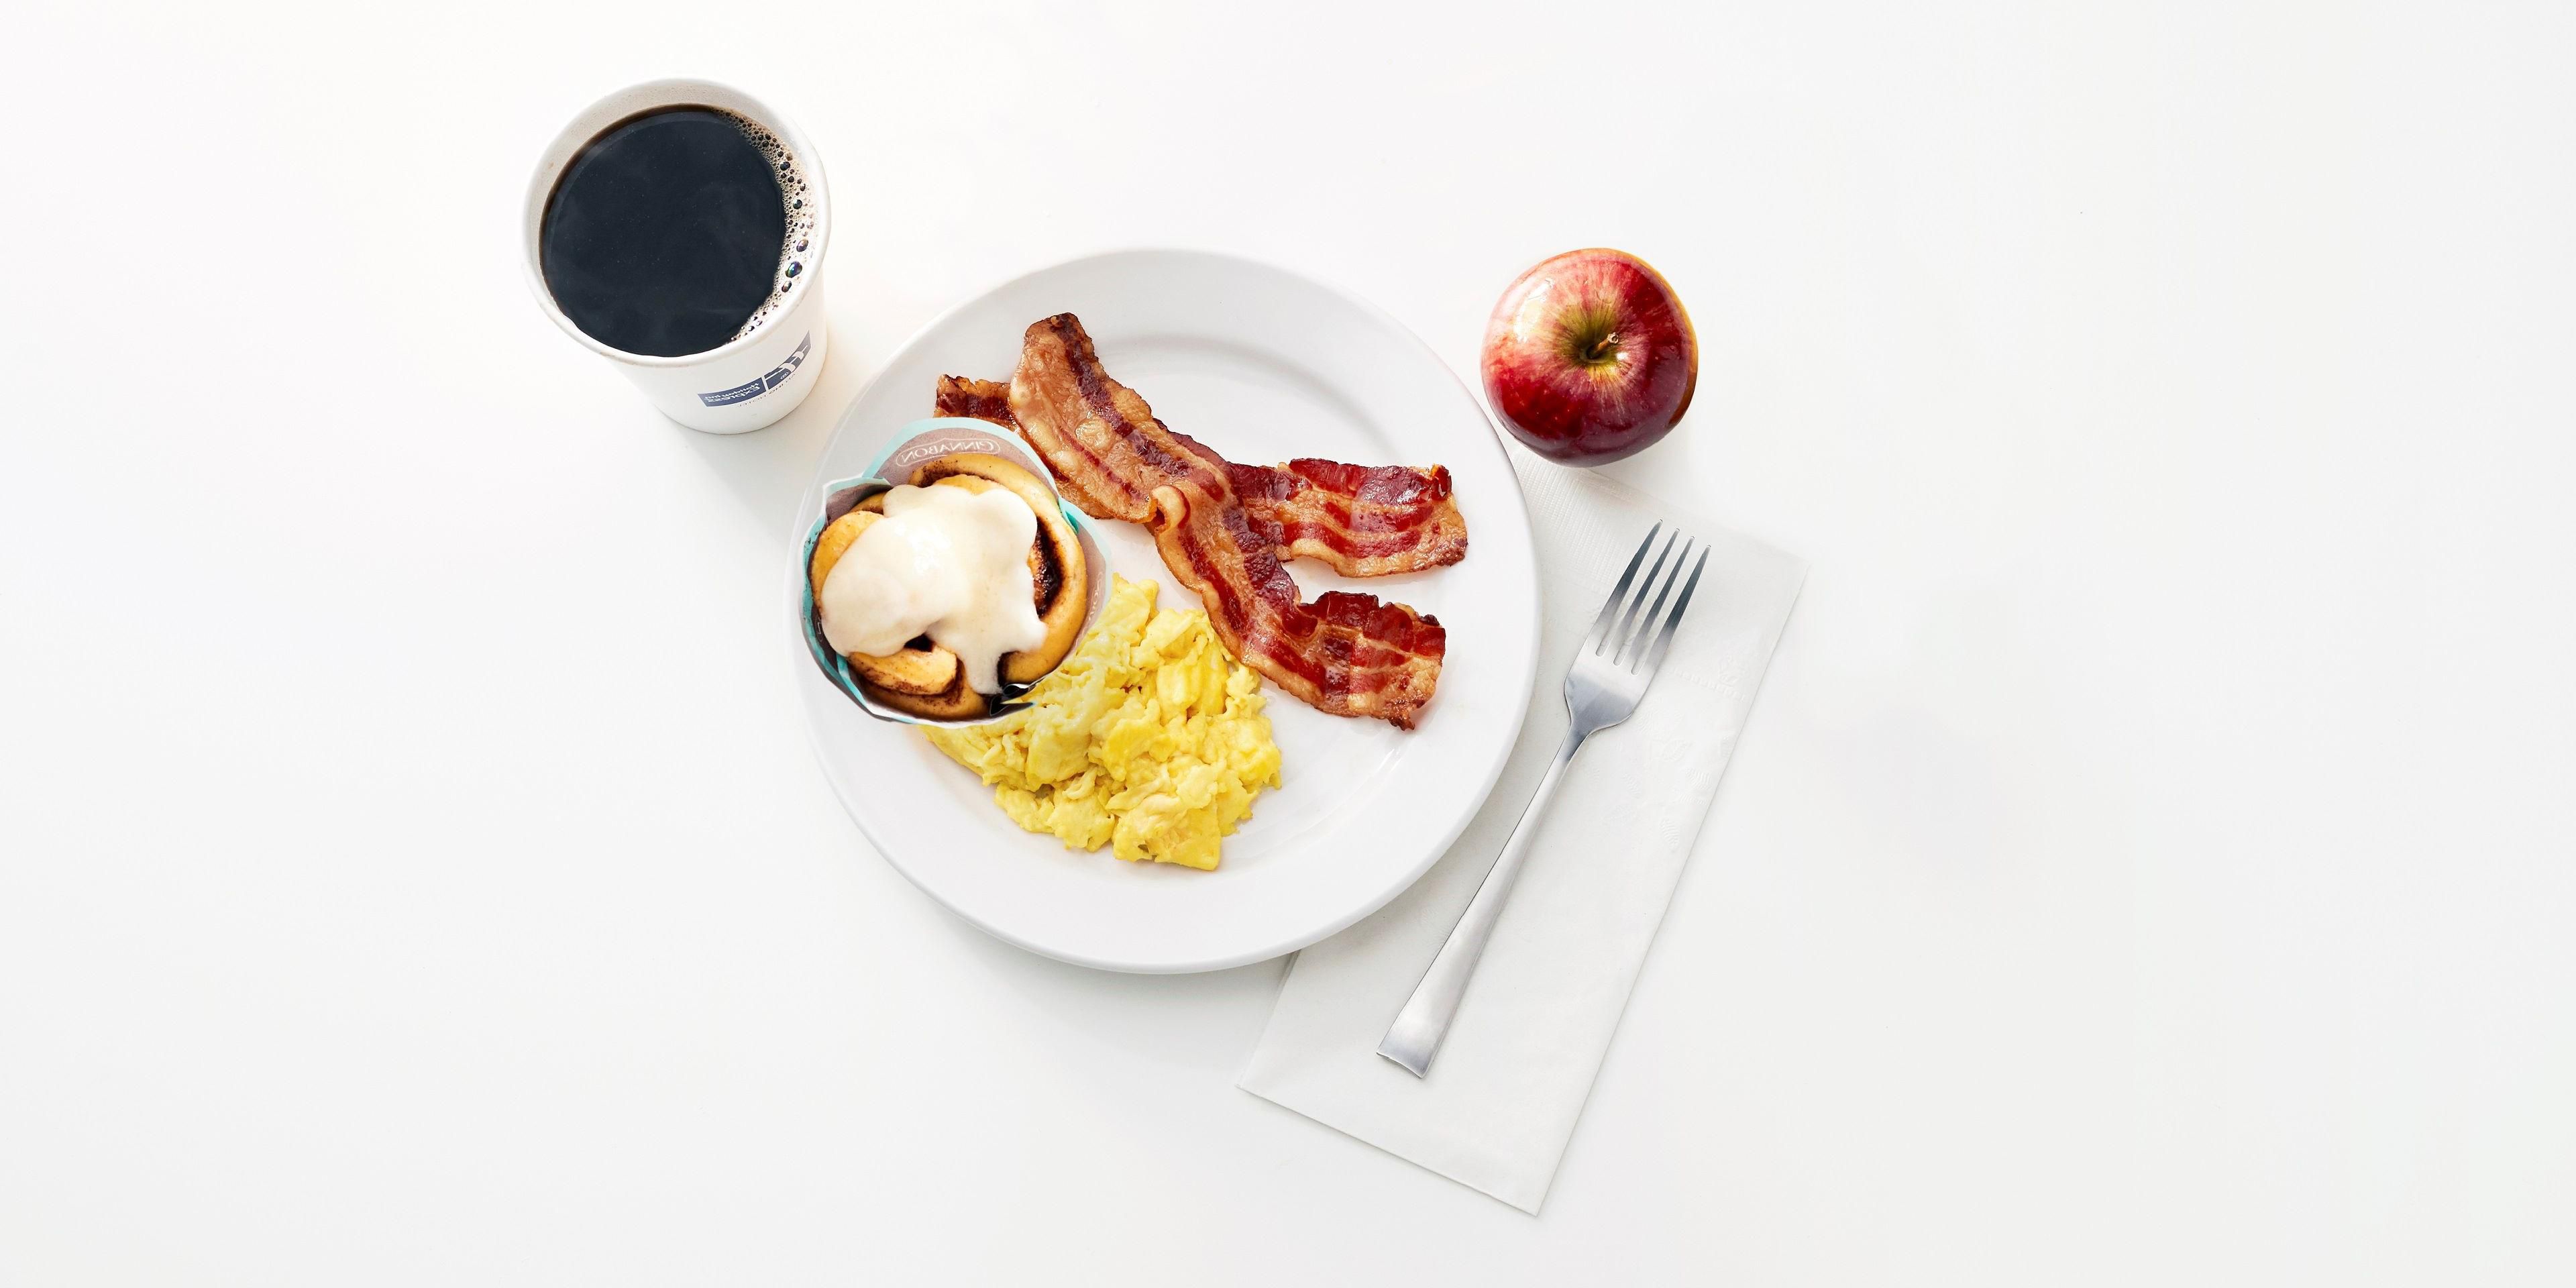 Kick start your day with our Express Start Breakfast, with grab ‘n’ go options and favorites such as eggs and bacon, hot pancakes, our signature cinnamon rolls and fresh coffee. Offered from 6am-9:30am Monday thru Friday and 7am-10am Saturday and Sunday.